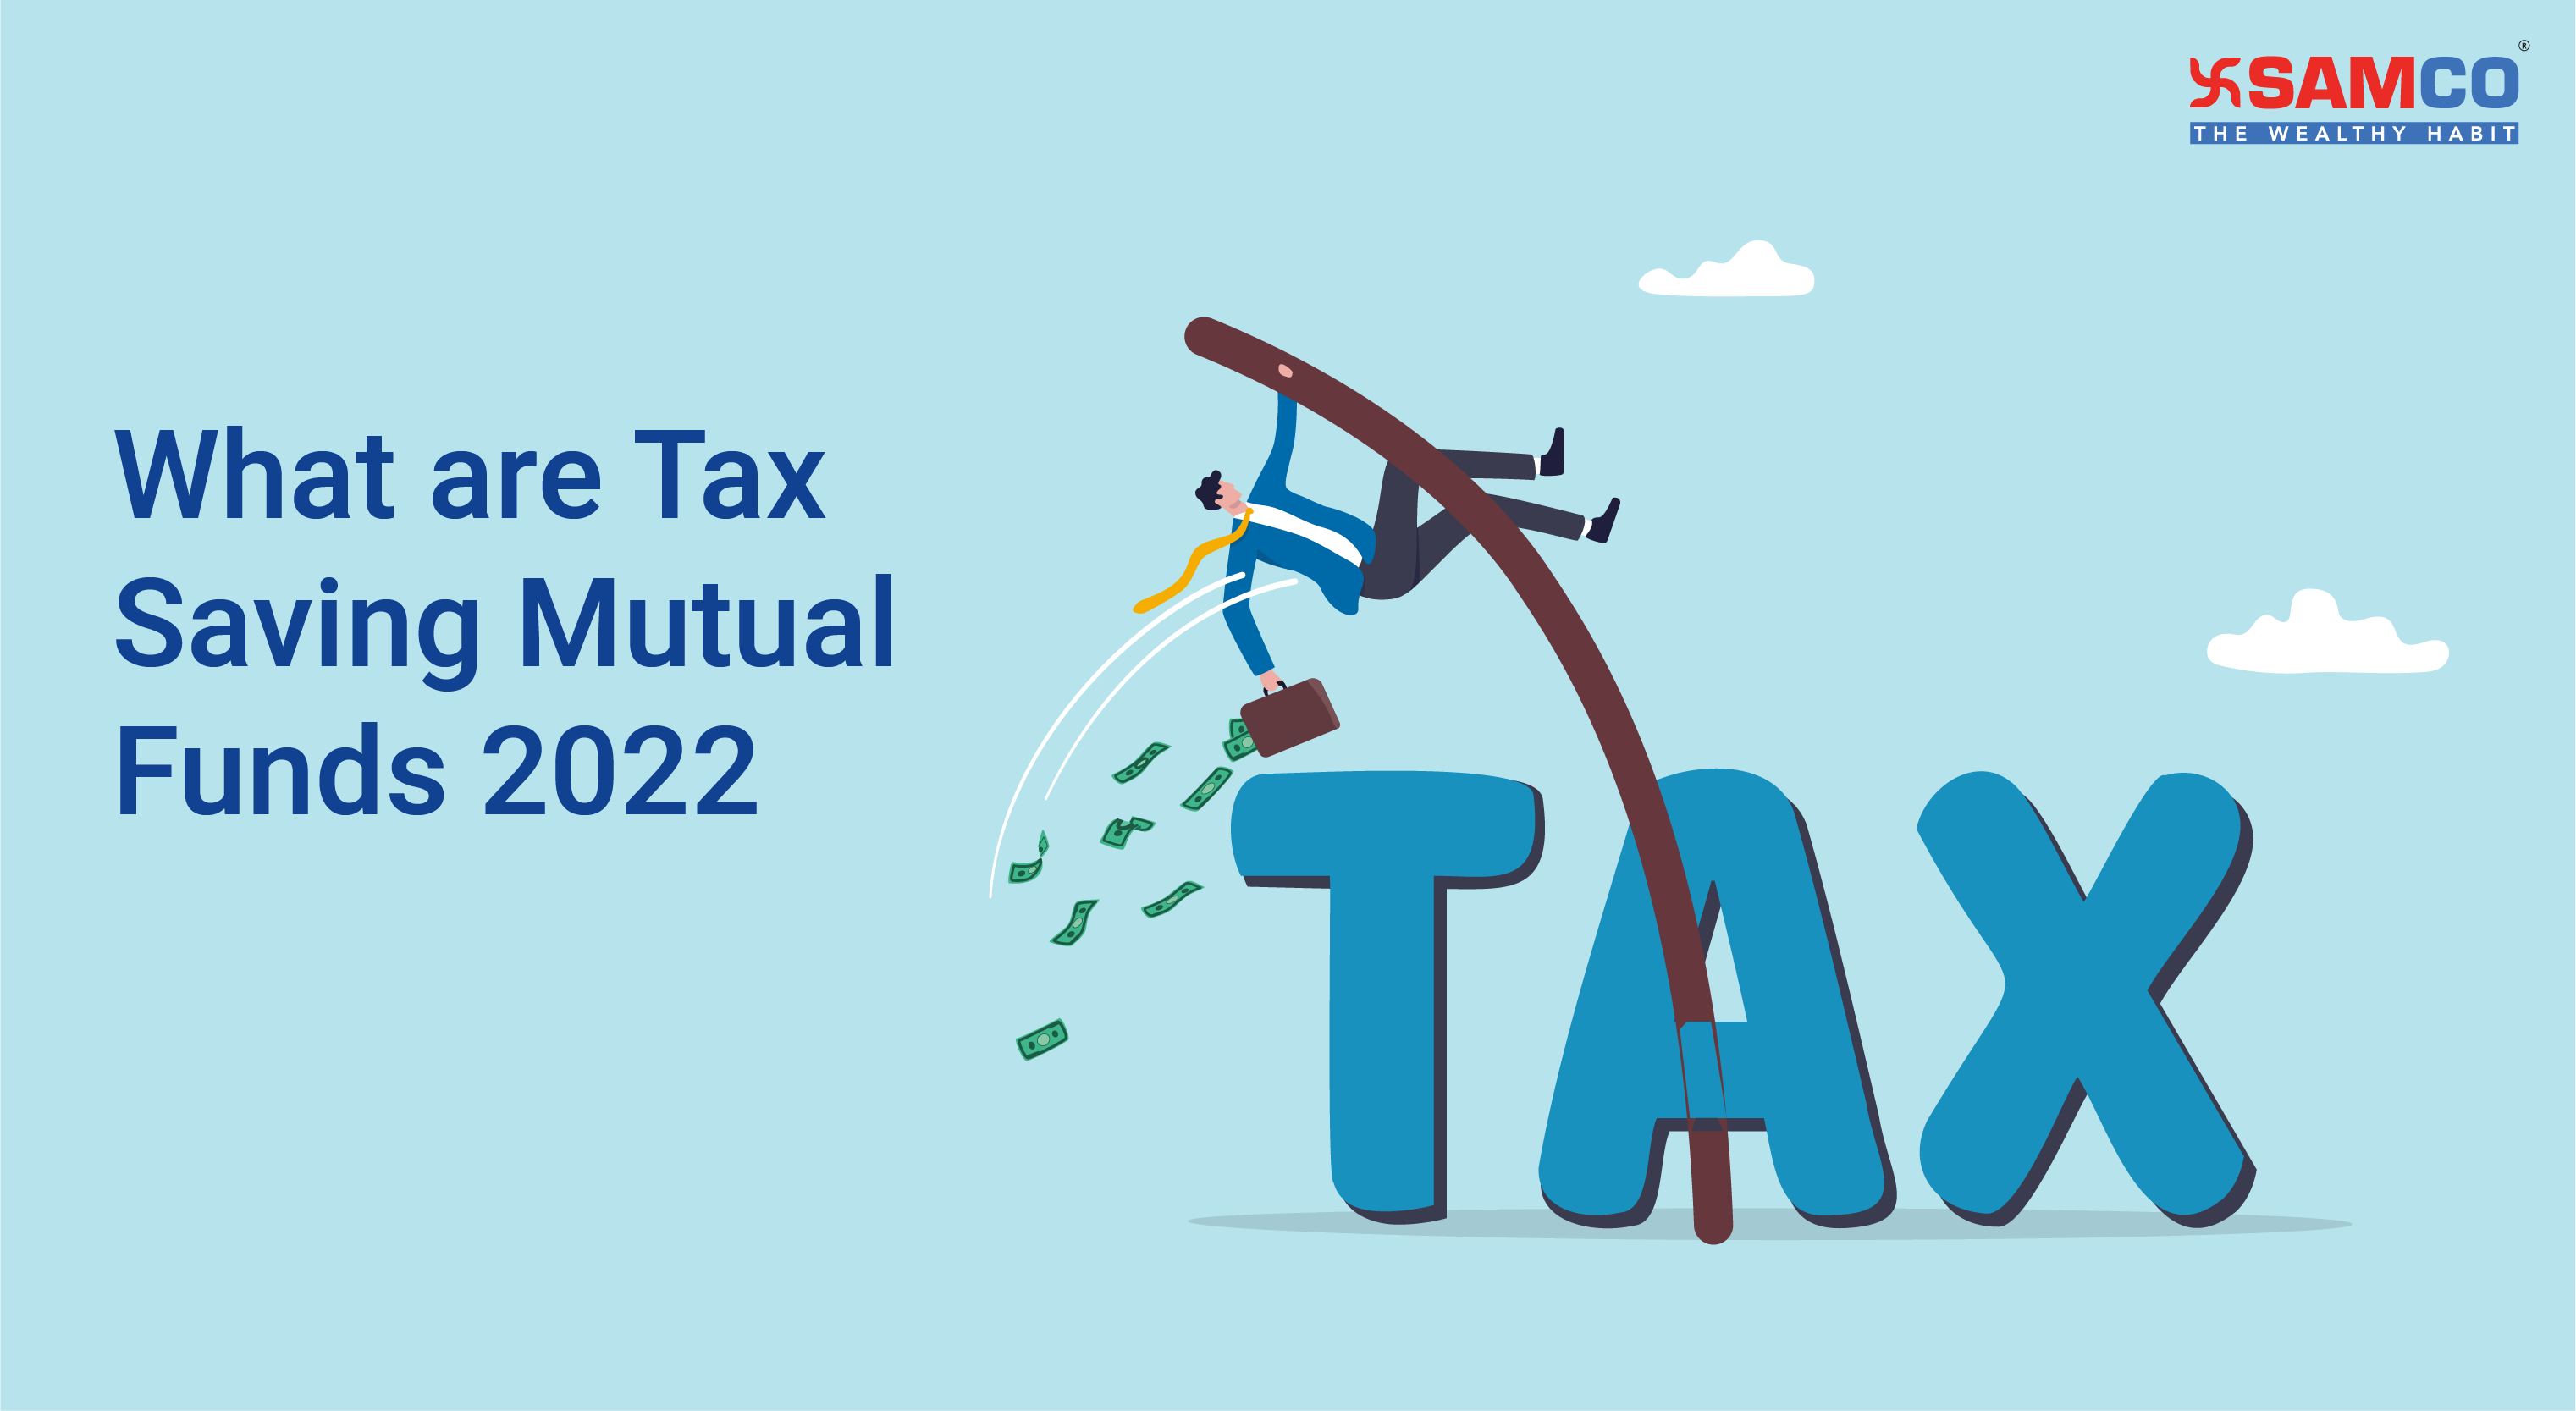 What are Tax Saving Mutual Funds 2022